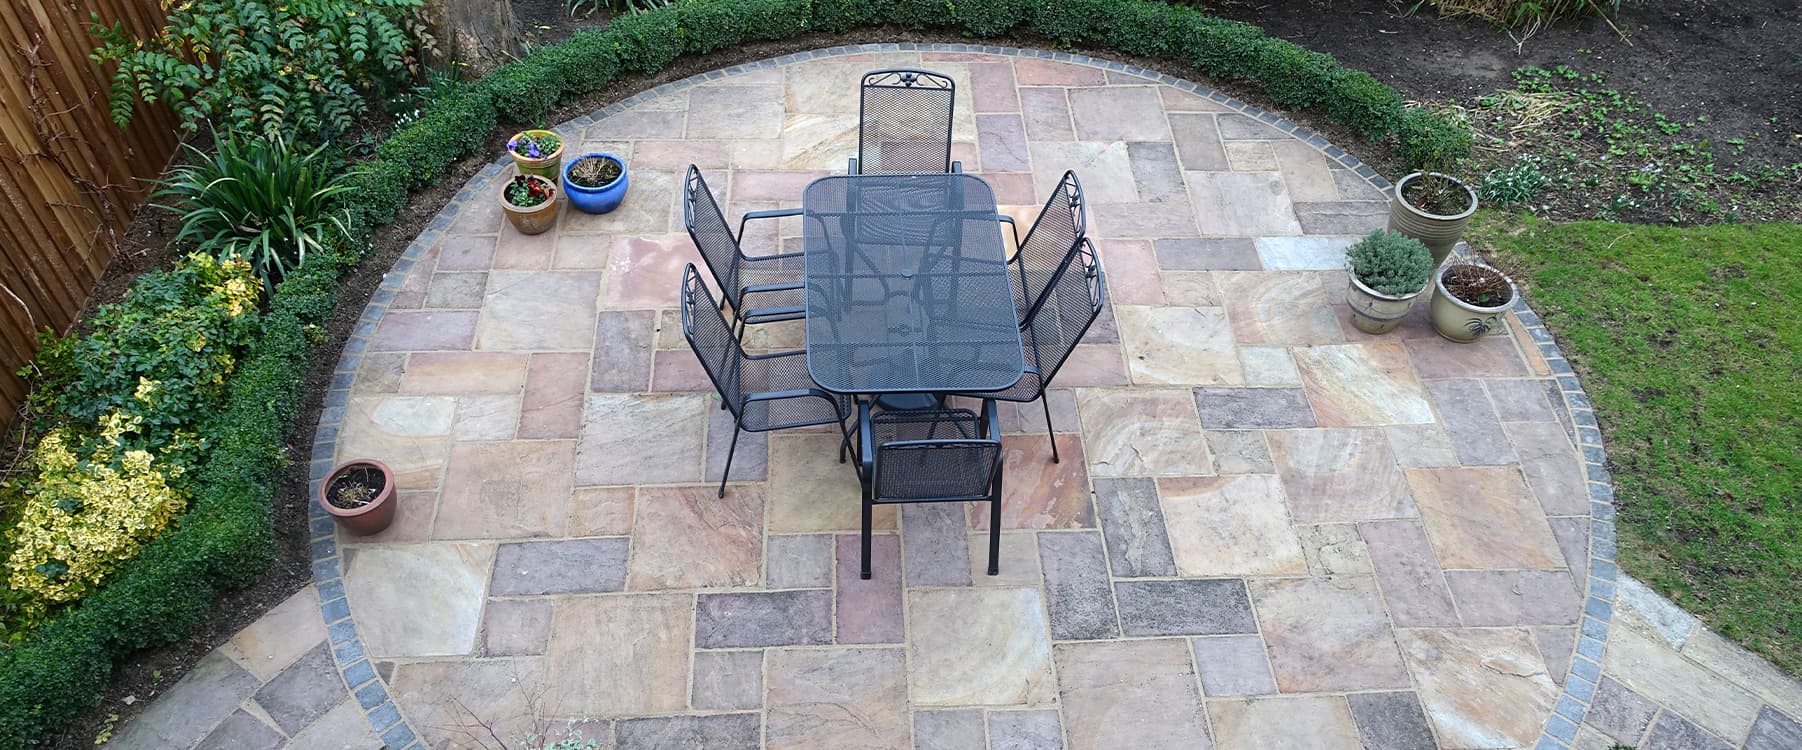 Patio-paving-experts South Norwood SE25